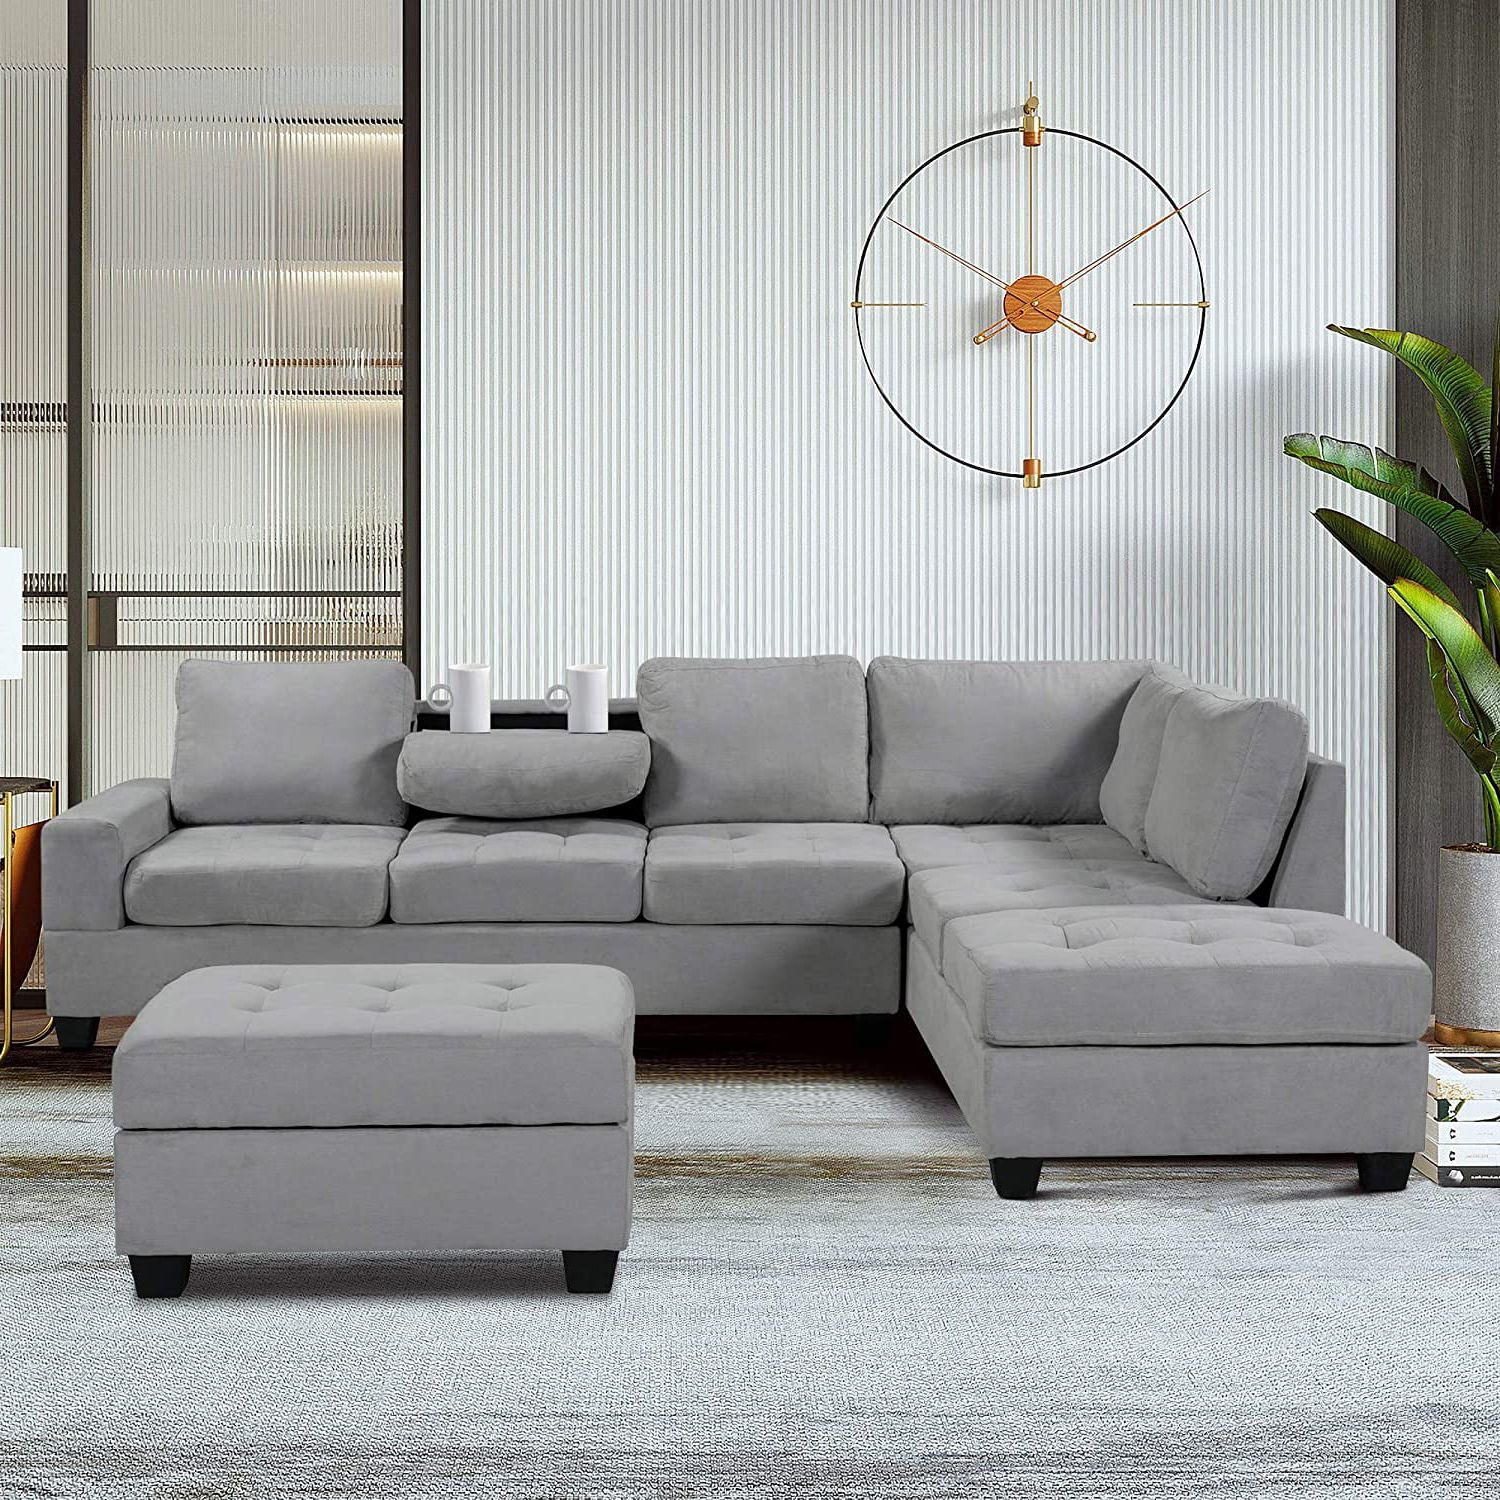 2018 Convertible L Shaped Sectional Sofas Pertaining To 3 Piece Convertible Sectional Sofa L Shaped Couch With Reversible (Photo 7 of 15)